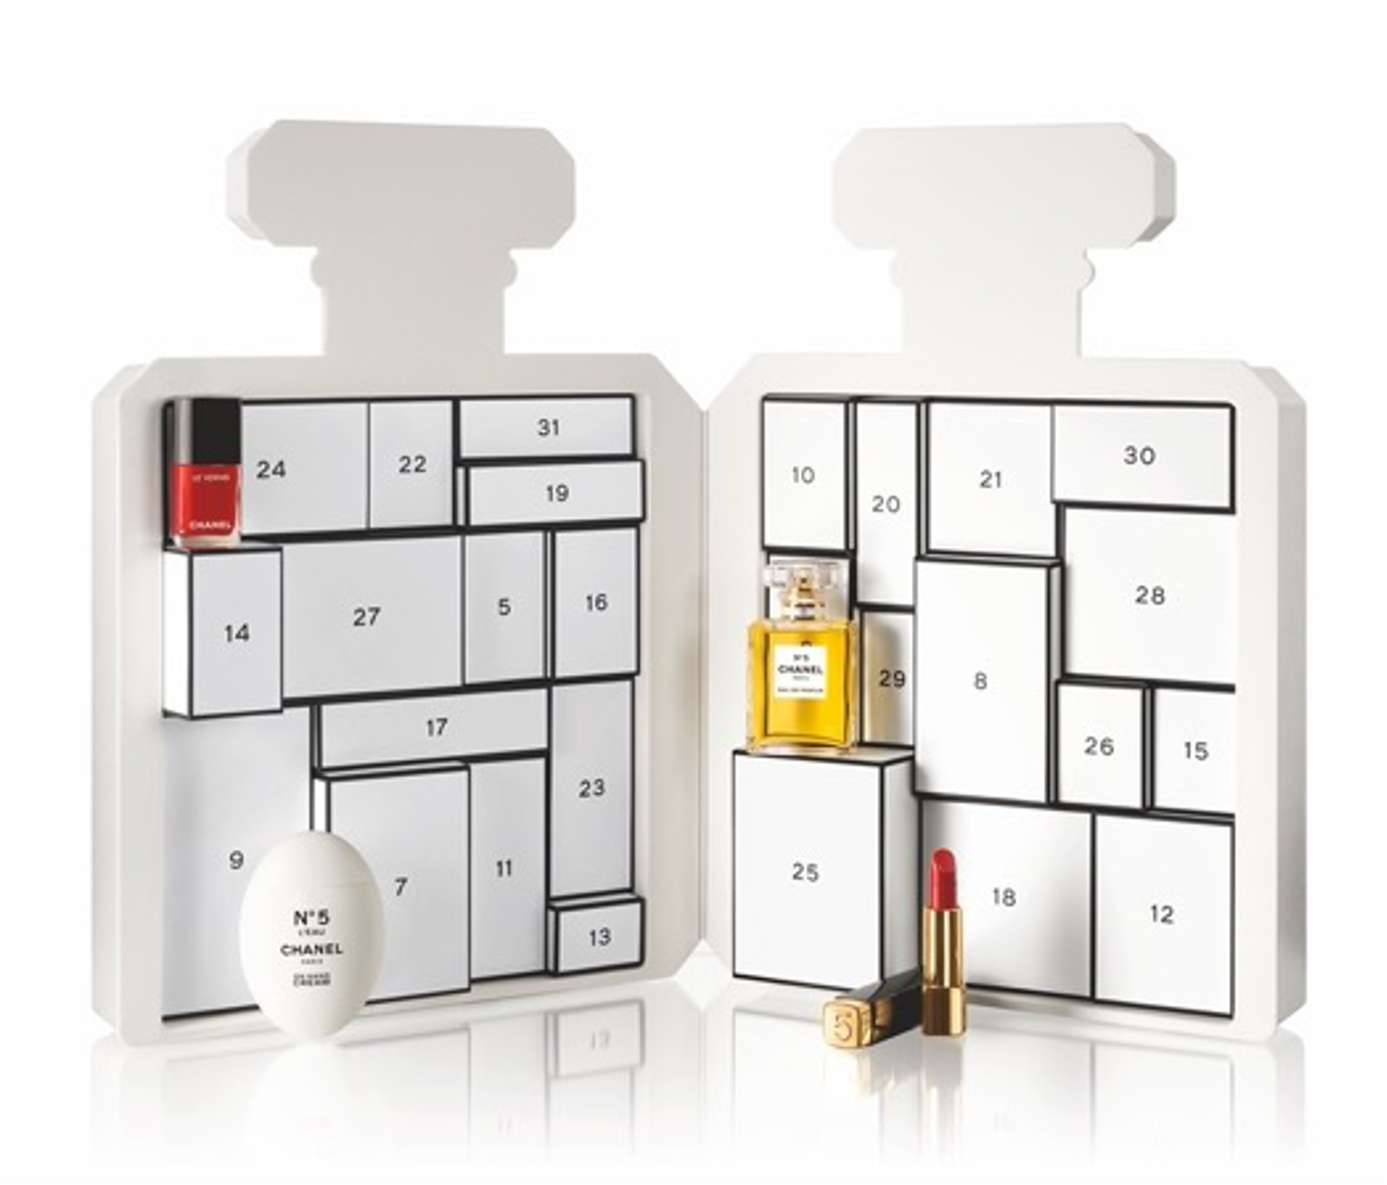 Knoll Packaging wins for Chanel Knoll Ecoform Molded Pulp Advent Calendar